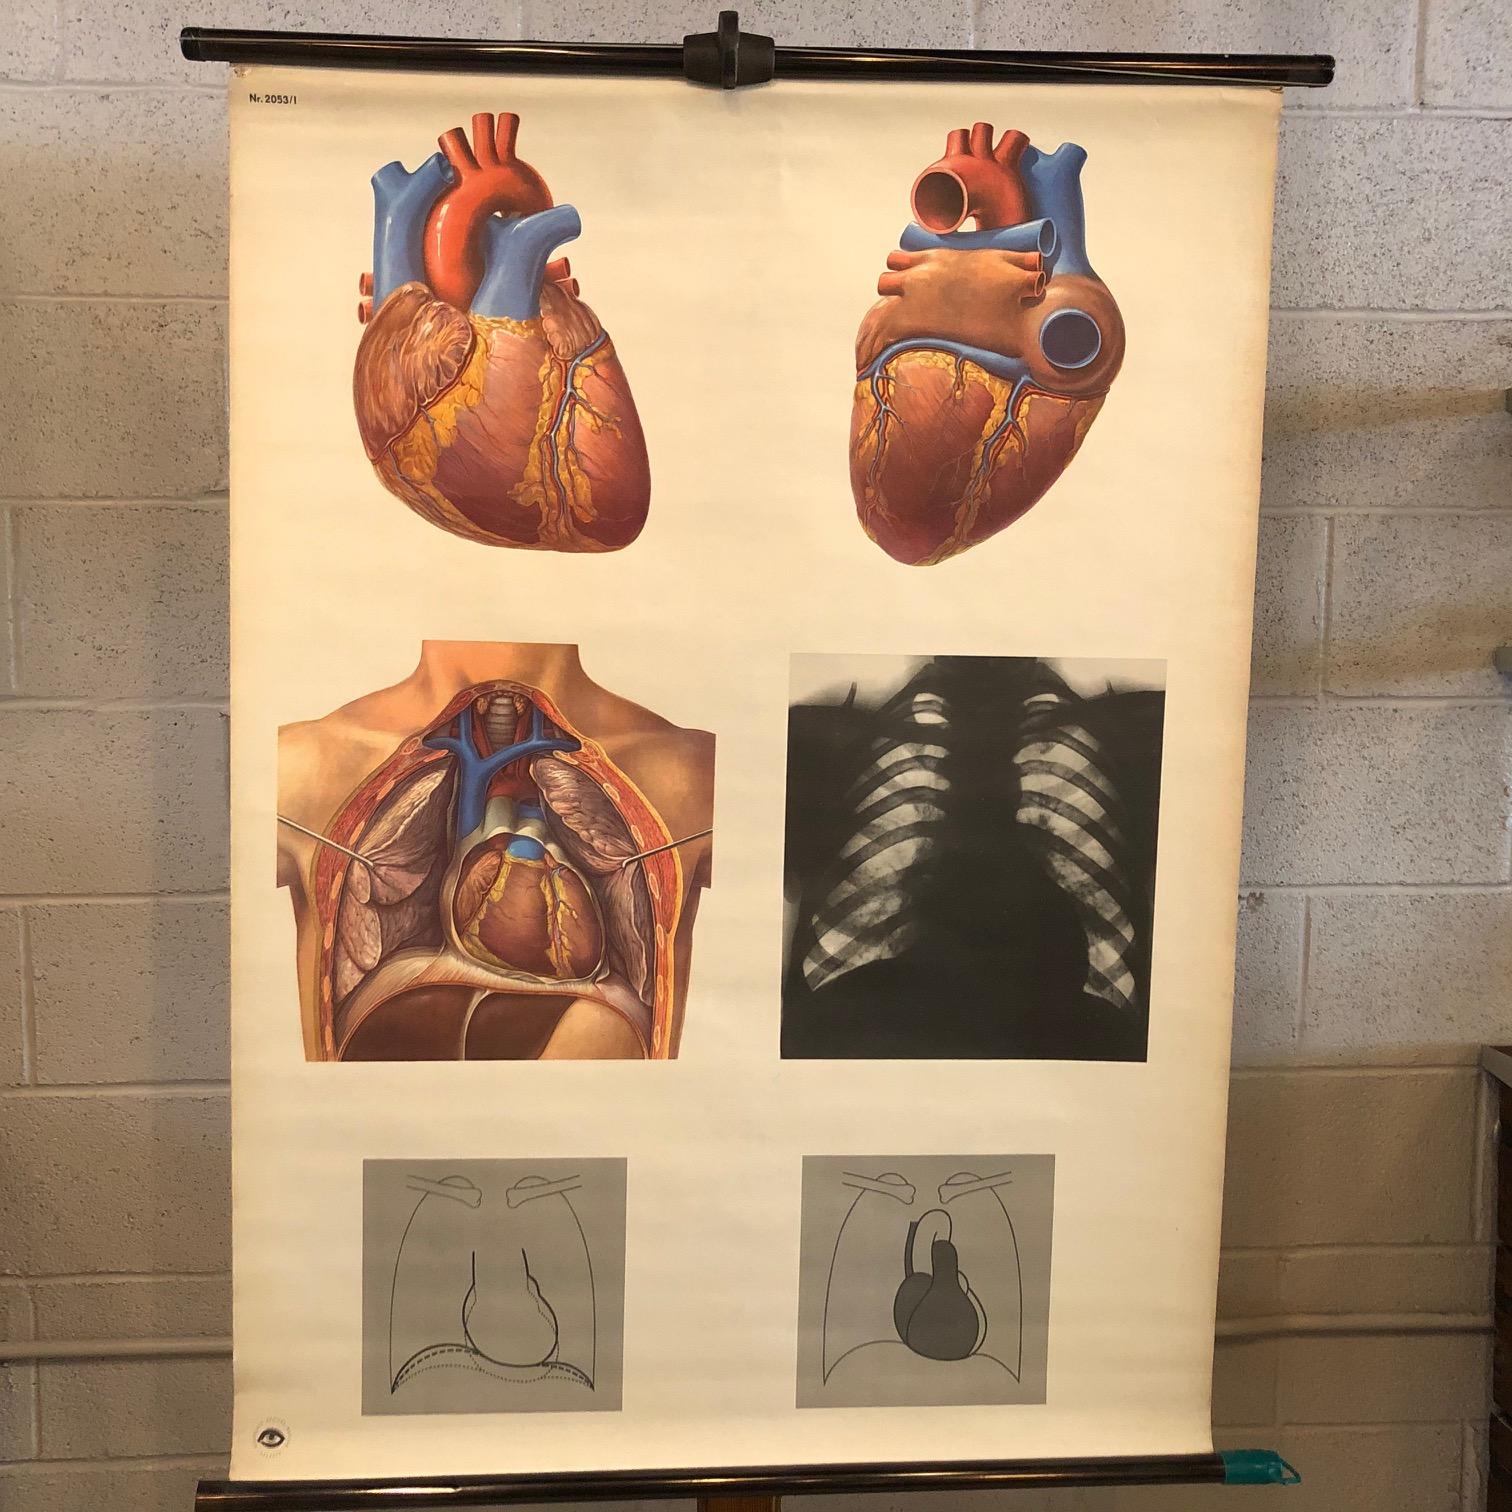 German, educational, anatomical, roll-up, chart depicting the heart, Das Herz from the Deutsches Hygiene Museum, Dresden is printed on canvas backed paper on copper colored hollow steel rods.
   